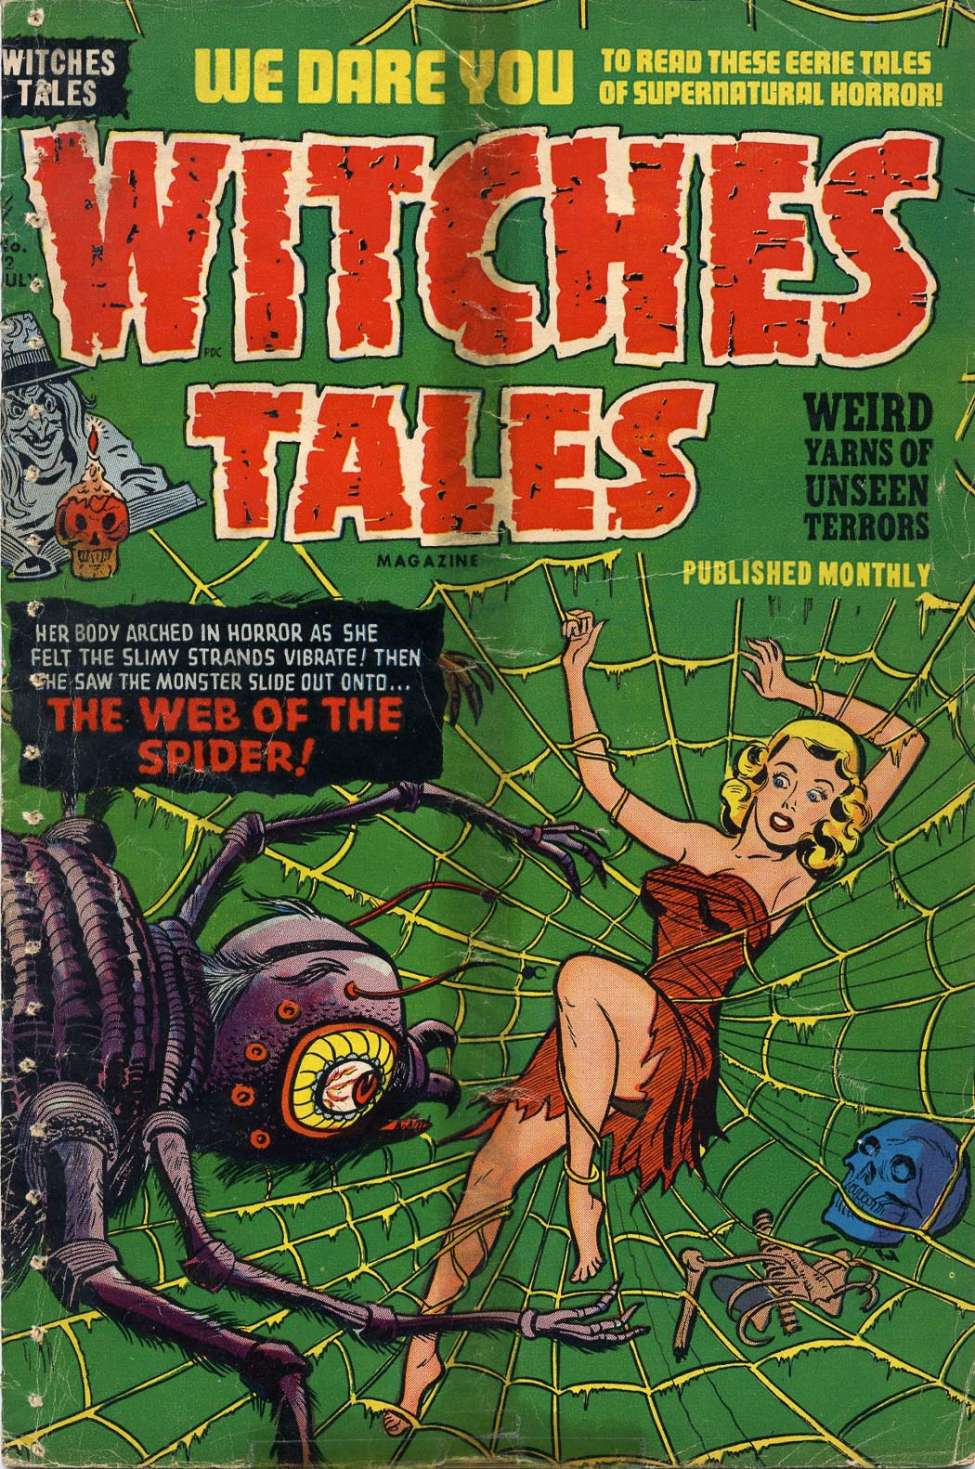 Book Cover For Witches Tales 12